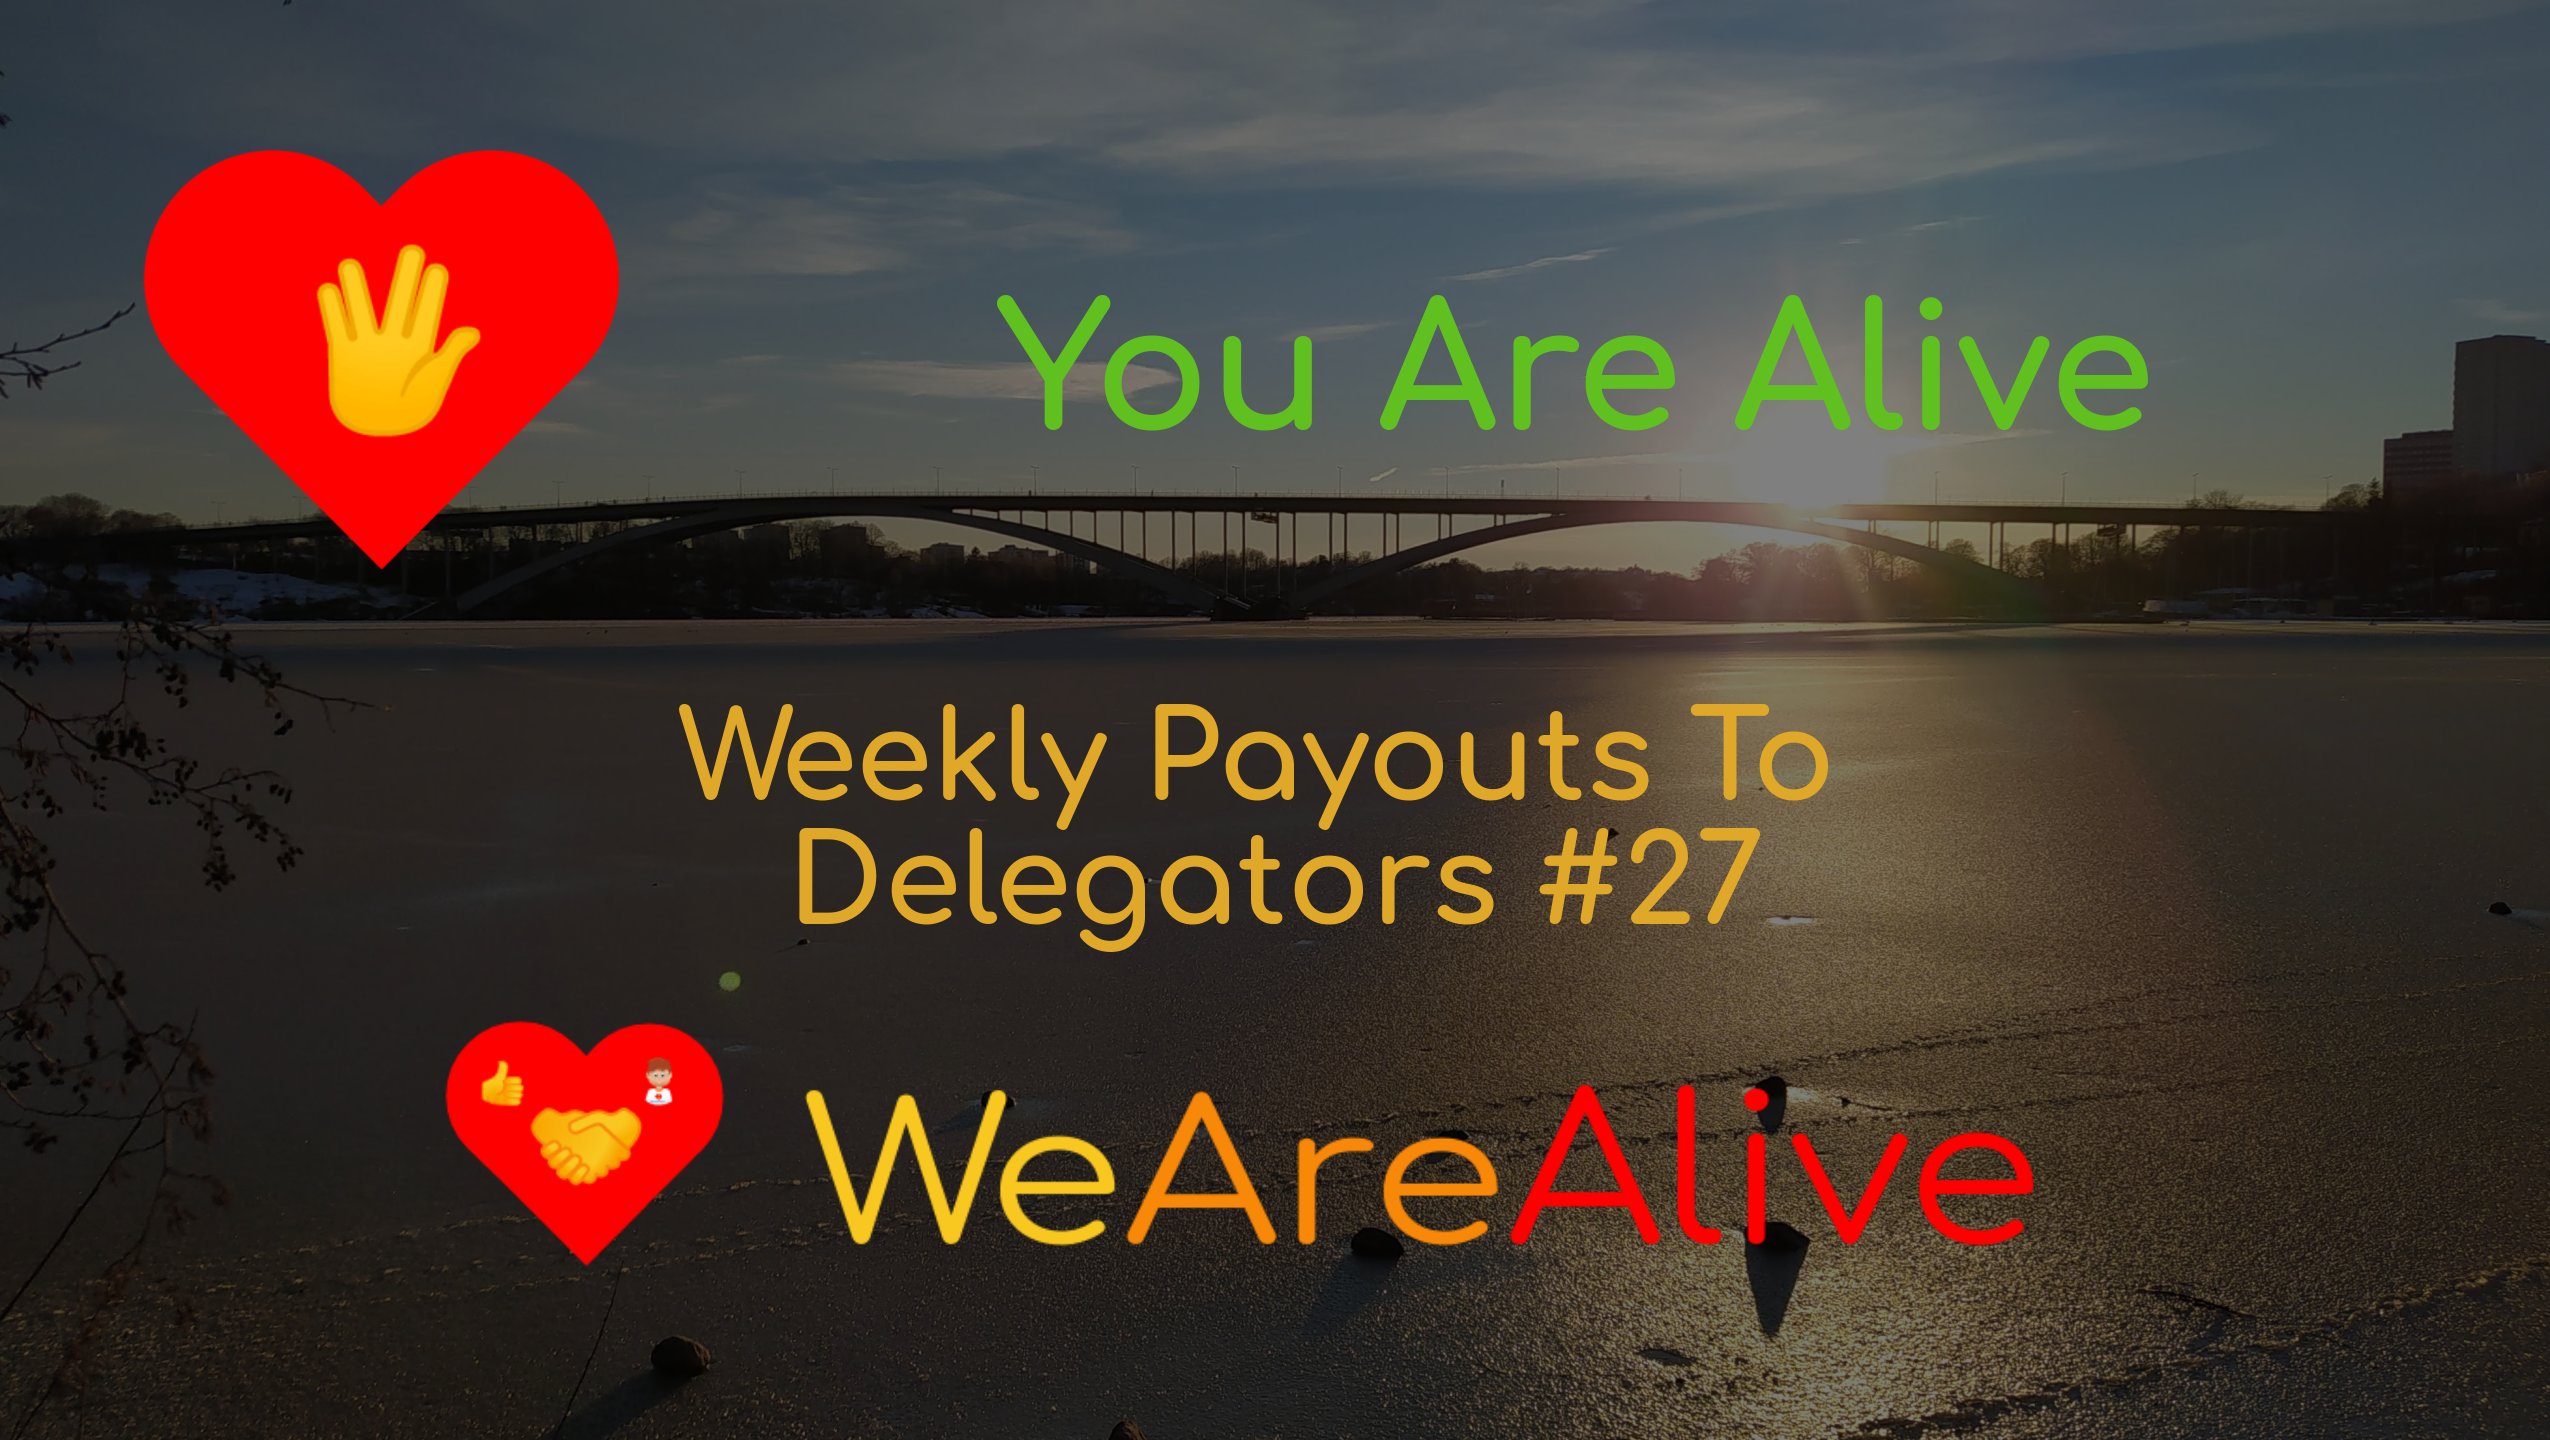 @youarealive/you-are-alive-weekly-payouts-to-hp-delegators-27